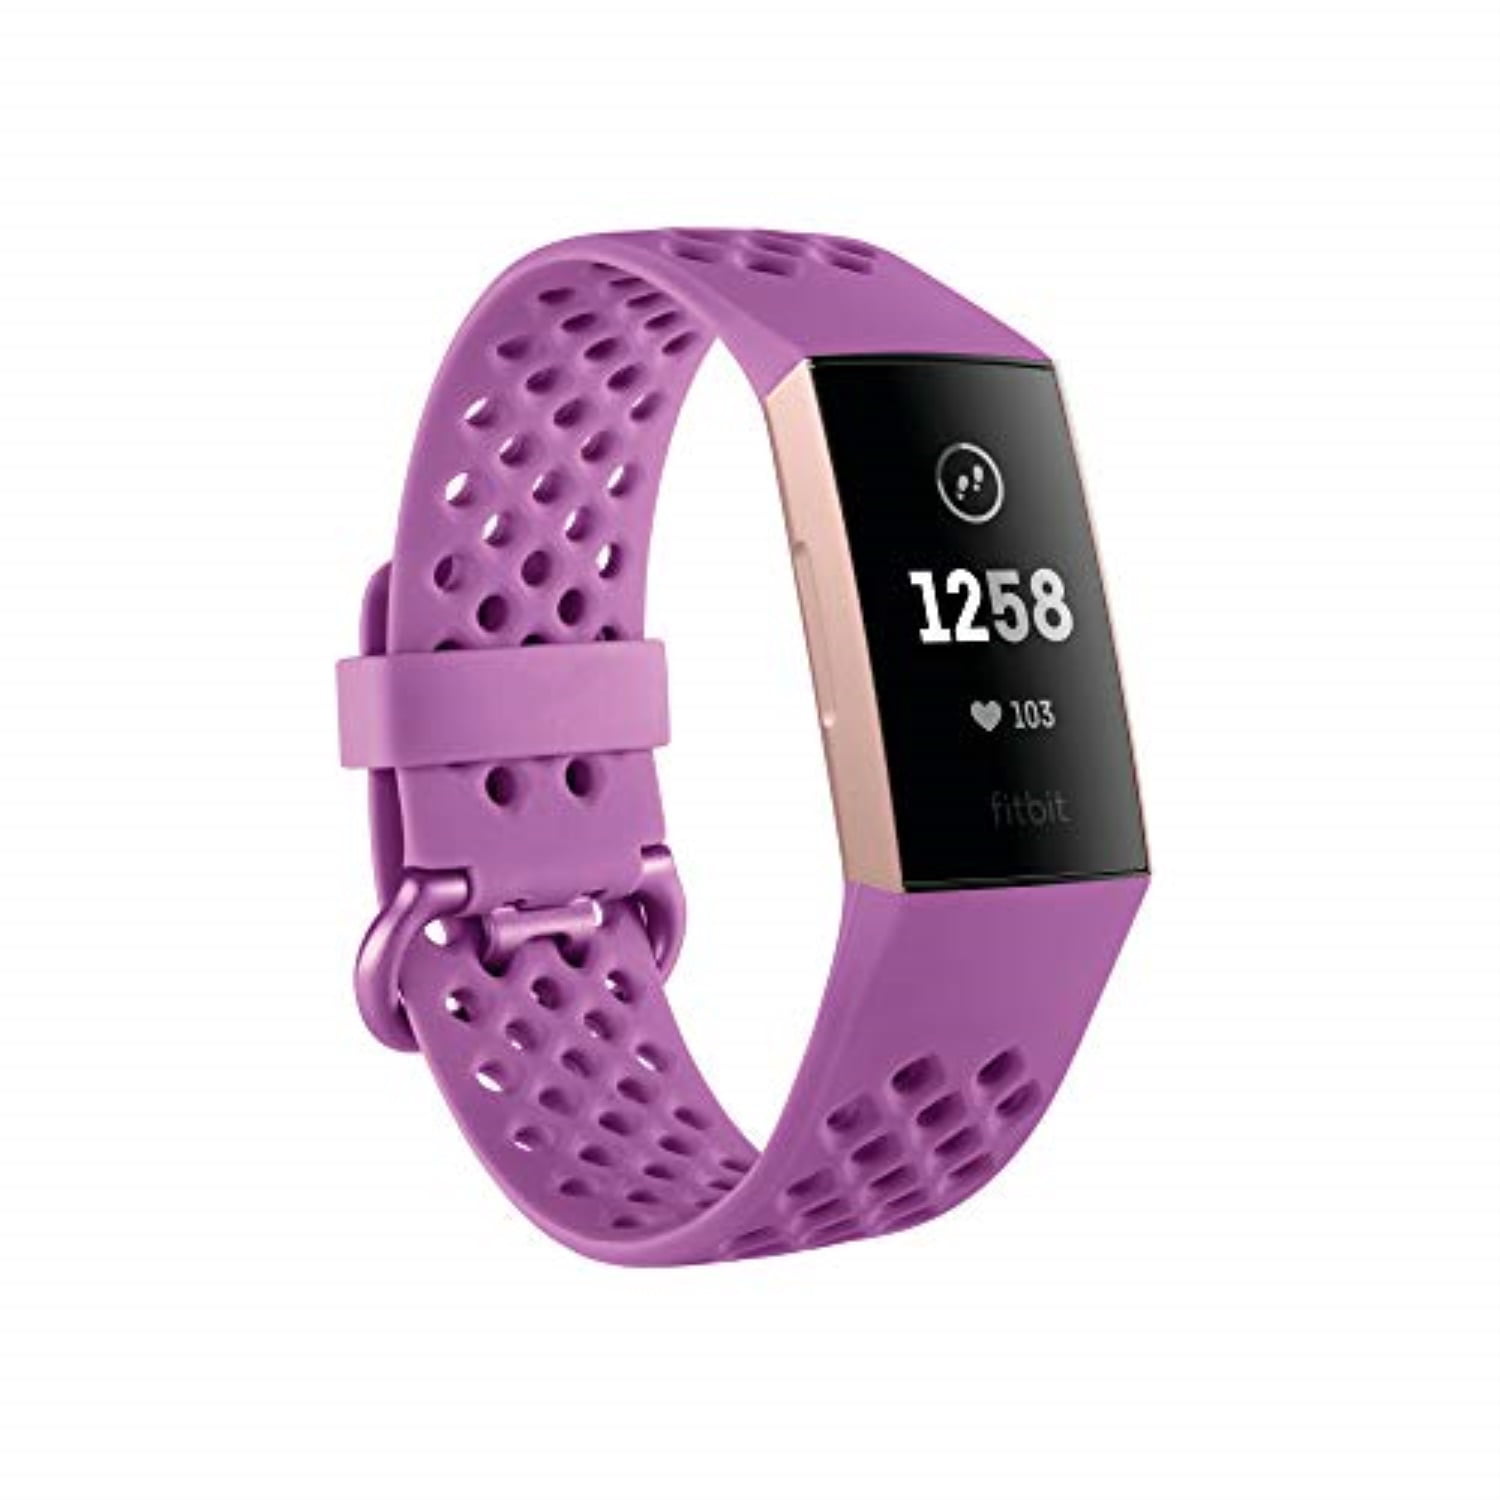 fitbit charge 3 fitness activity tracker, rose gold/berry, one size (s &amp; l bands included)